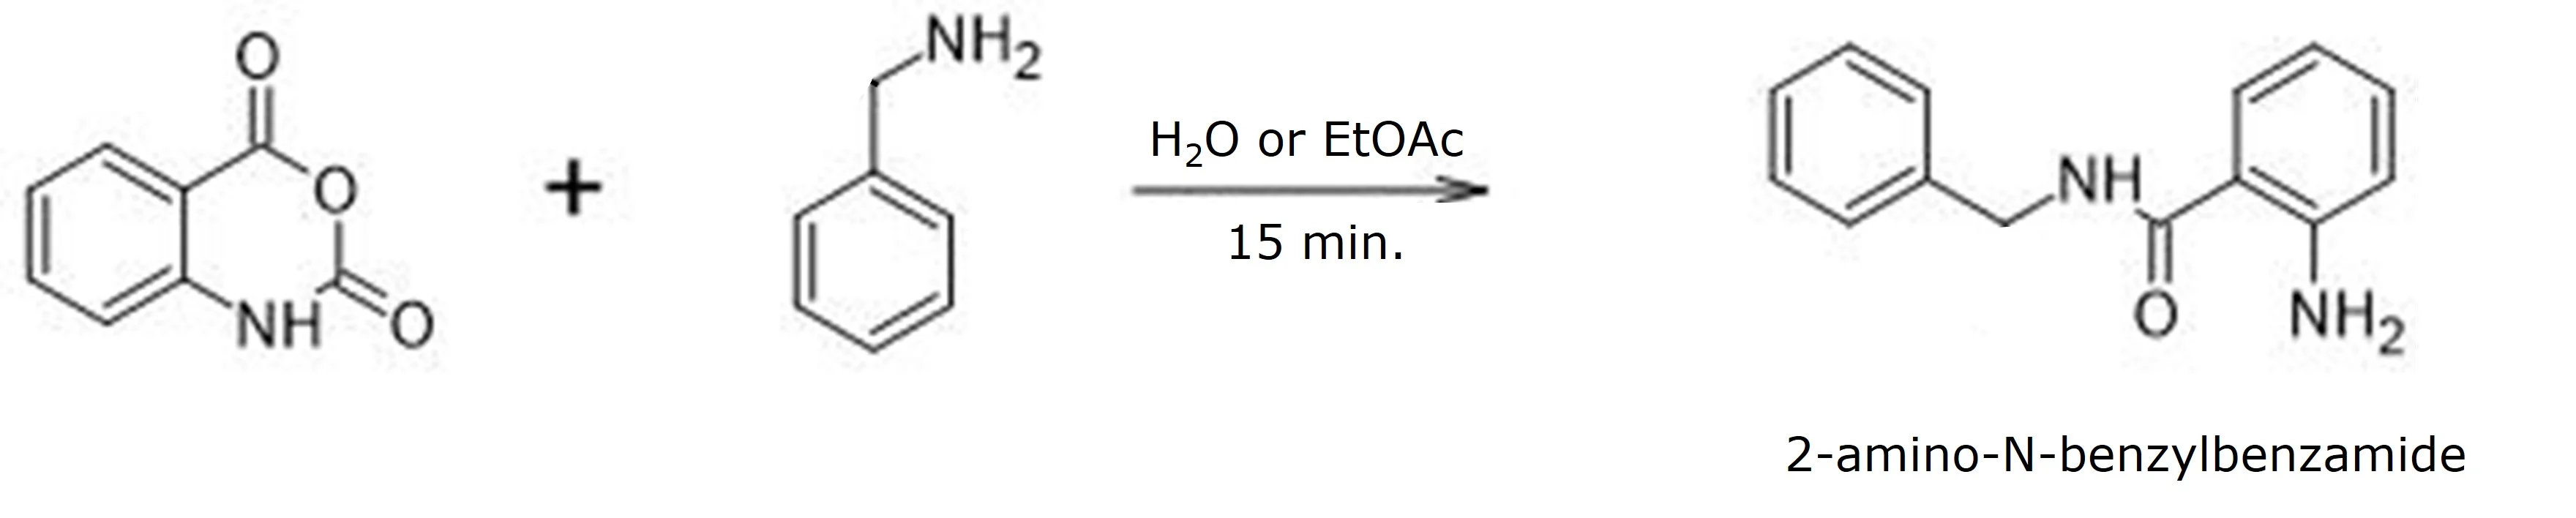 Figure 1. Reaction of isatoic anhydride with benzylamine produced 2-amino-N-benzylbenzamide. Solvents used were either water or EtOAc. Temperatures varied from 75 °C to 200 °C.